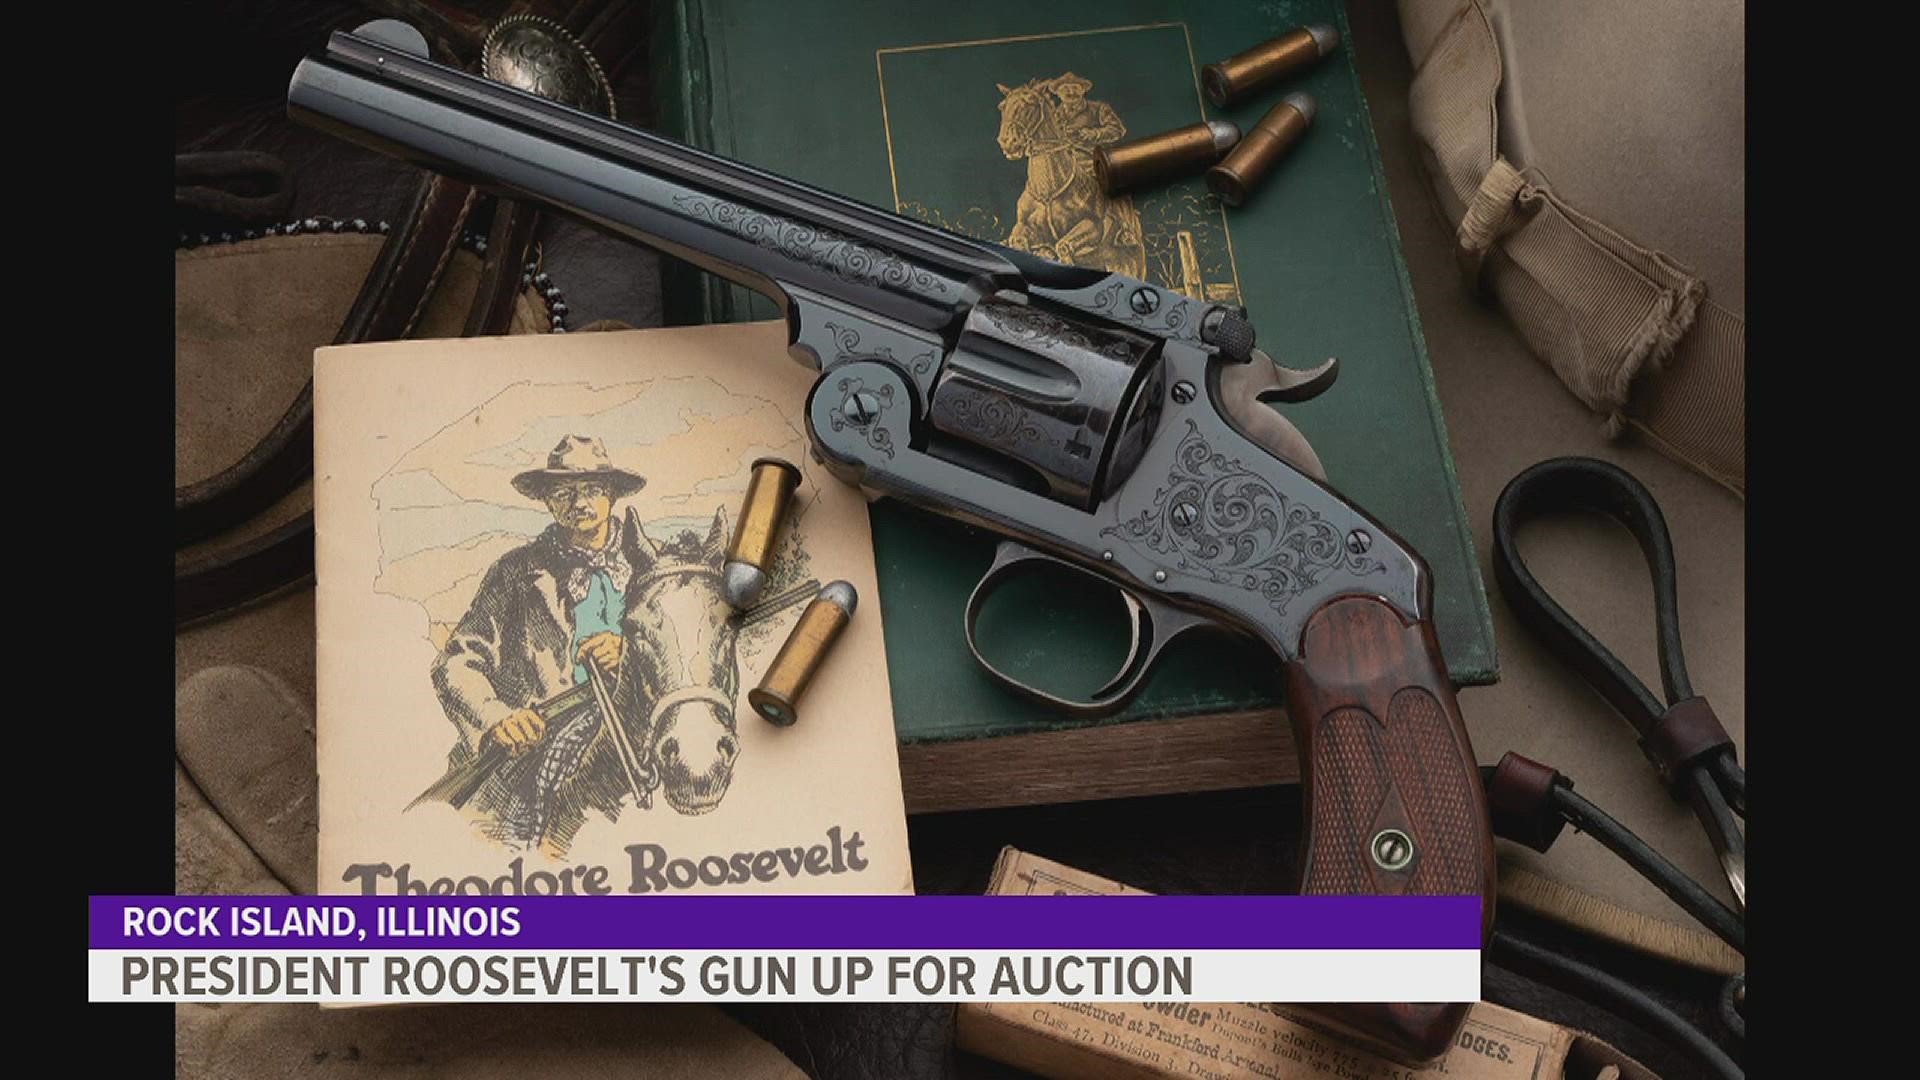 The Smith & Wesson revolver is estimated to be around $800,000 or $1.5M dollars.